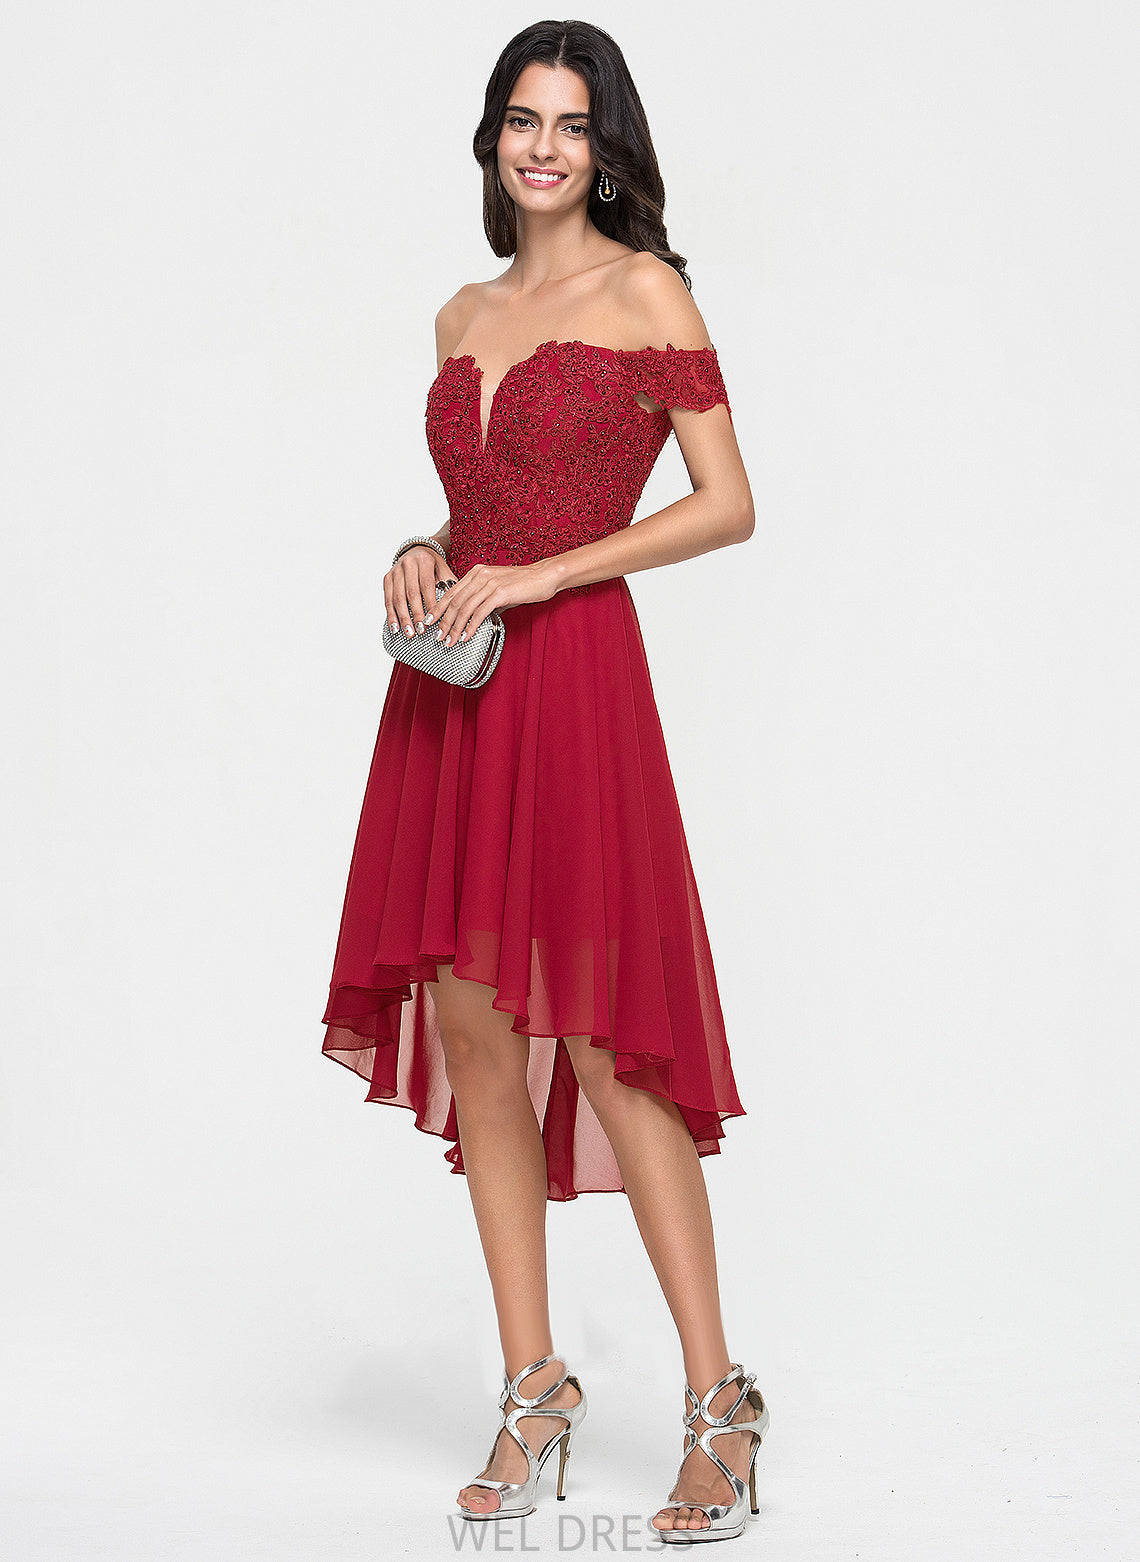 Lace Dress Off-the-Shoulder Homecoming With Chiffon Beading Homecoming Dresses Asymmetrical A-Line Norah